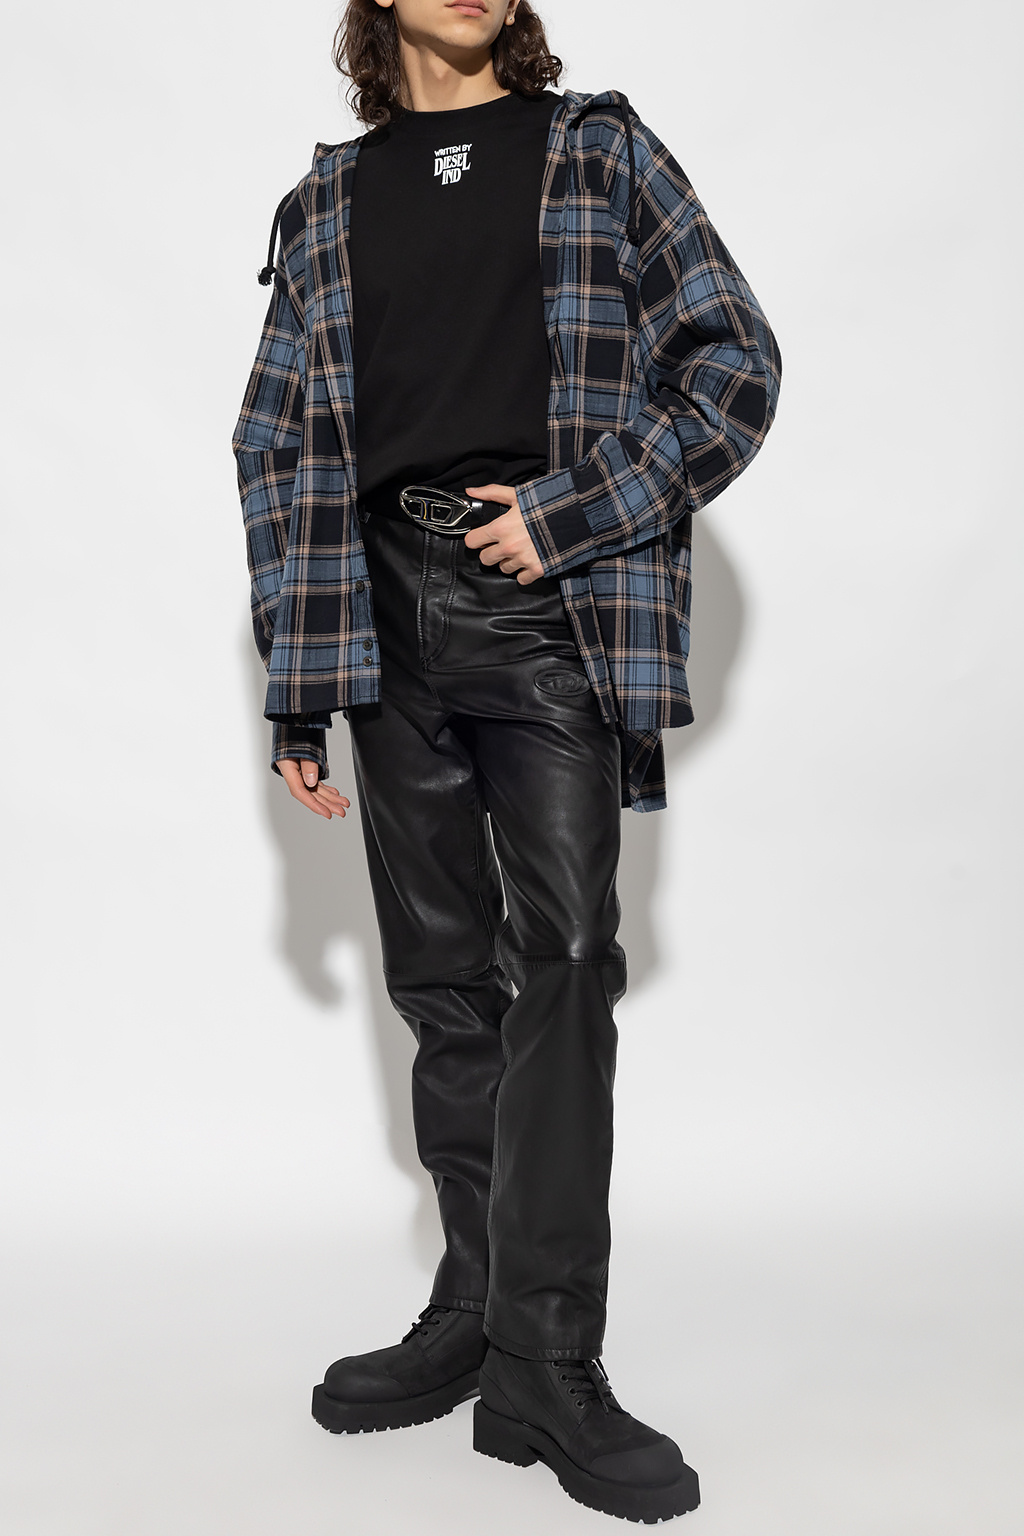 Diesel ‘S-DEWNY’ checked floral-print shirt